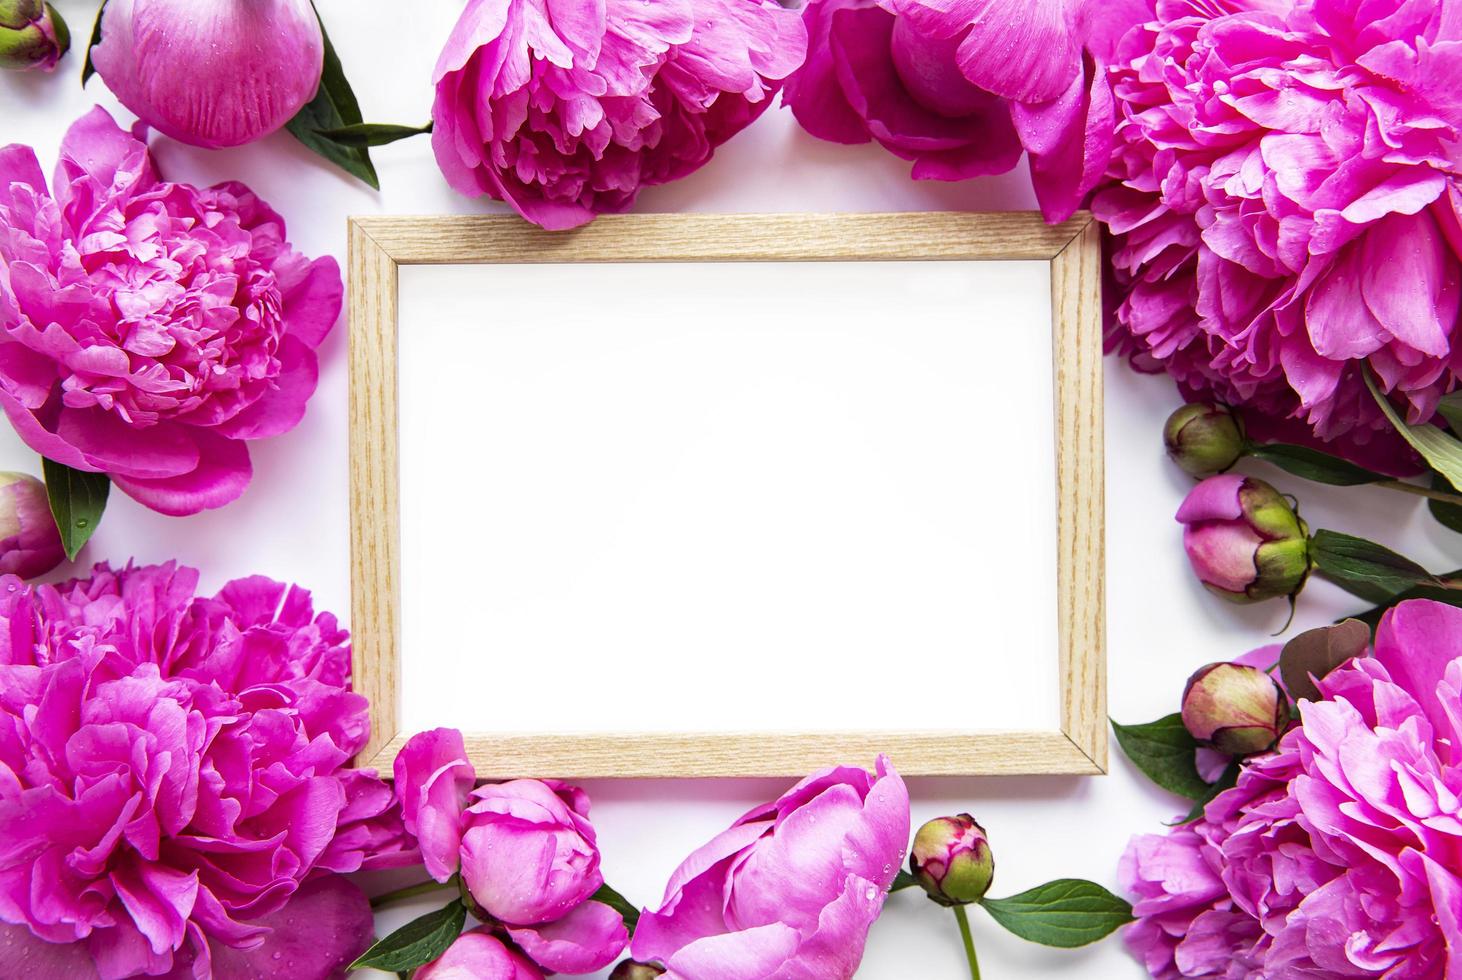 Wooden frame surrounded by beautiful pink peonies on a white background photo